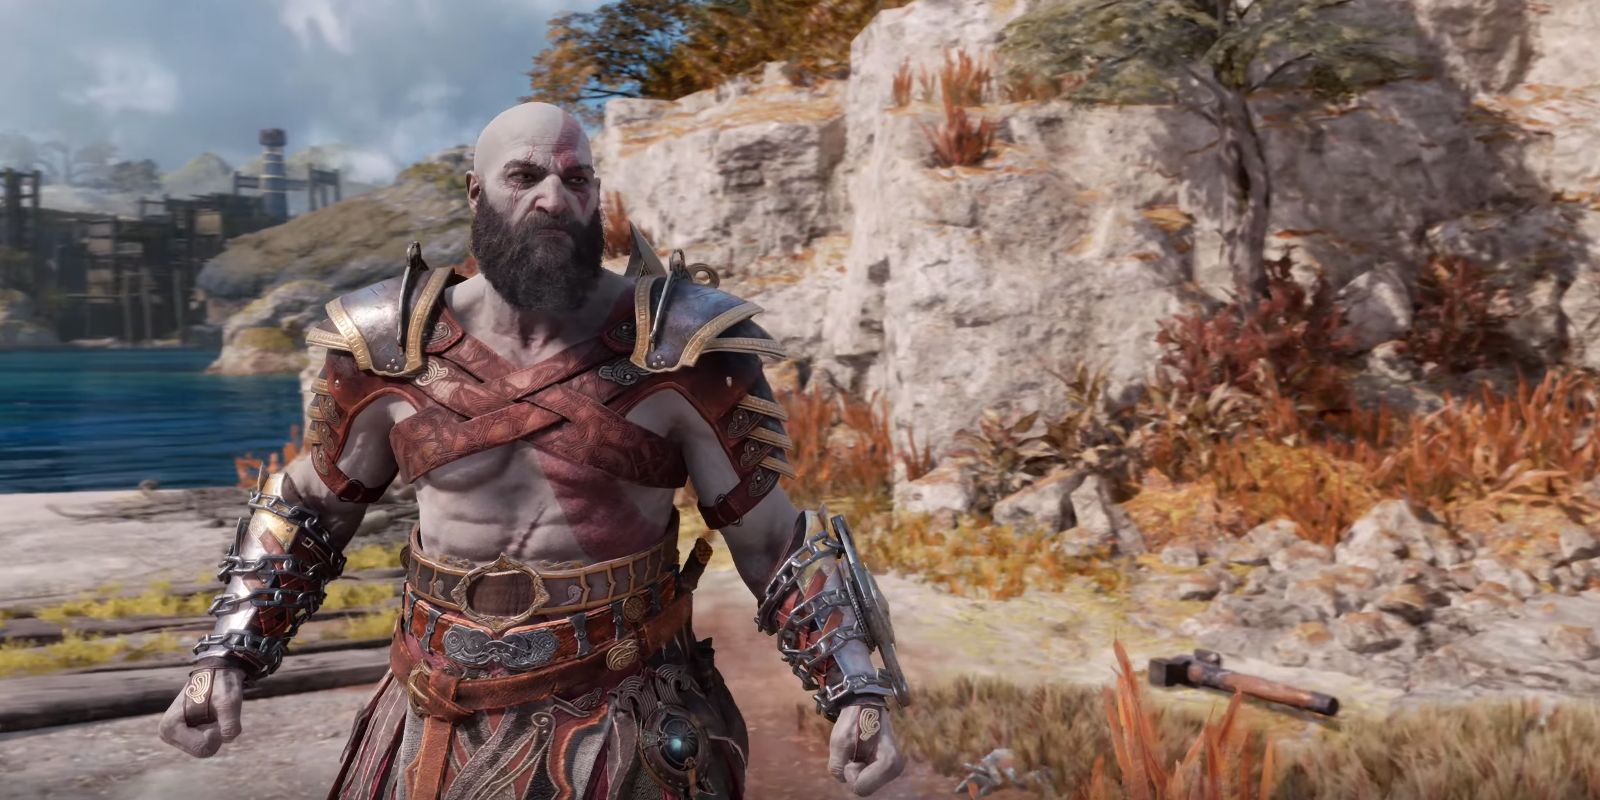 Kratos sporting Sol's Courage, a suit of armor in God of War Ragnarok.